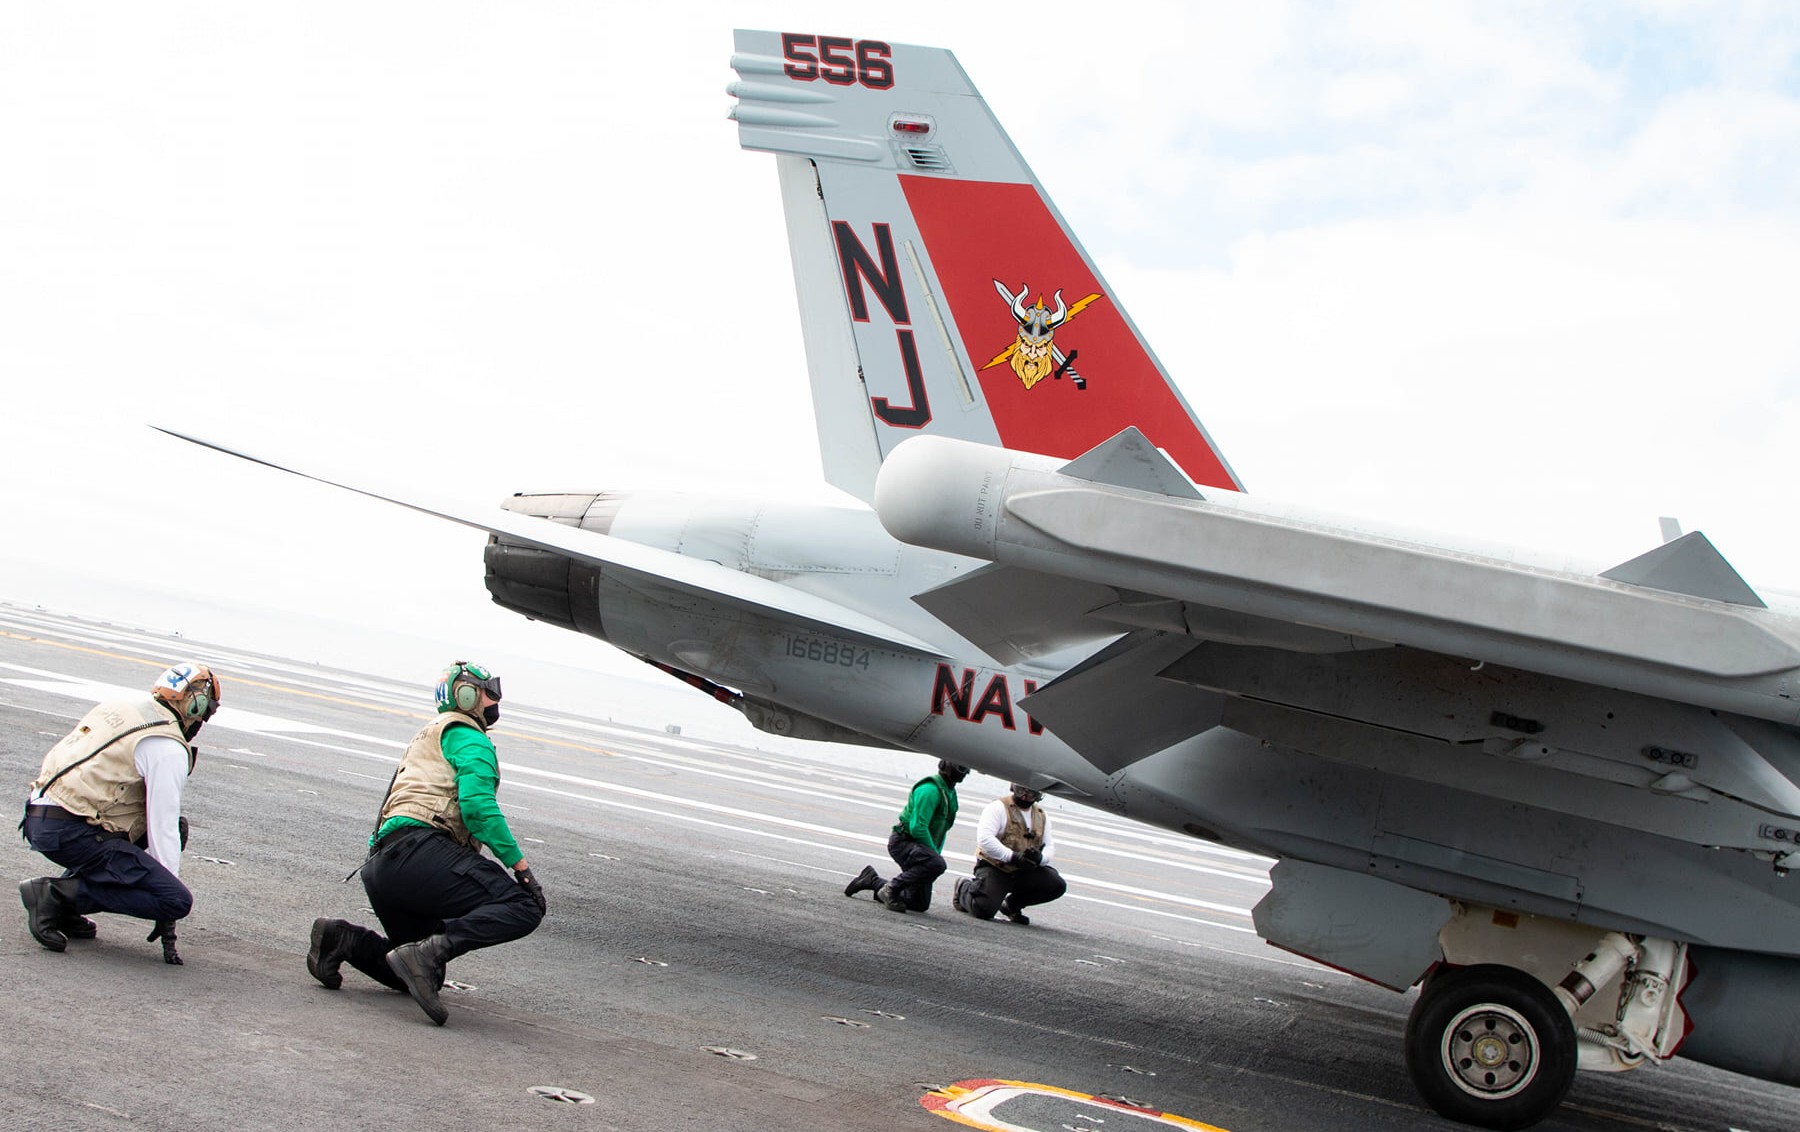 vaq-129 vikings electronic attack squadron fleet replacement frs us navy ea-18g growler 22